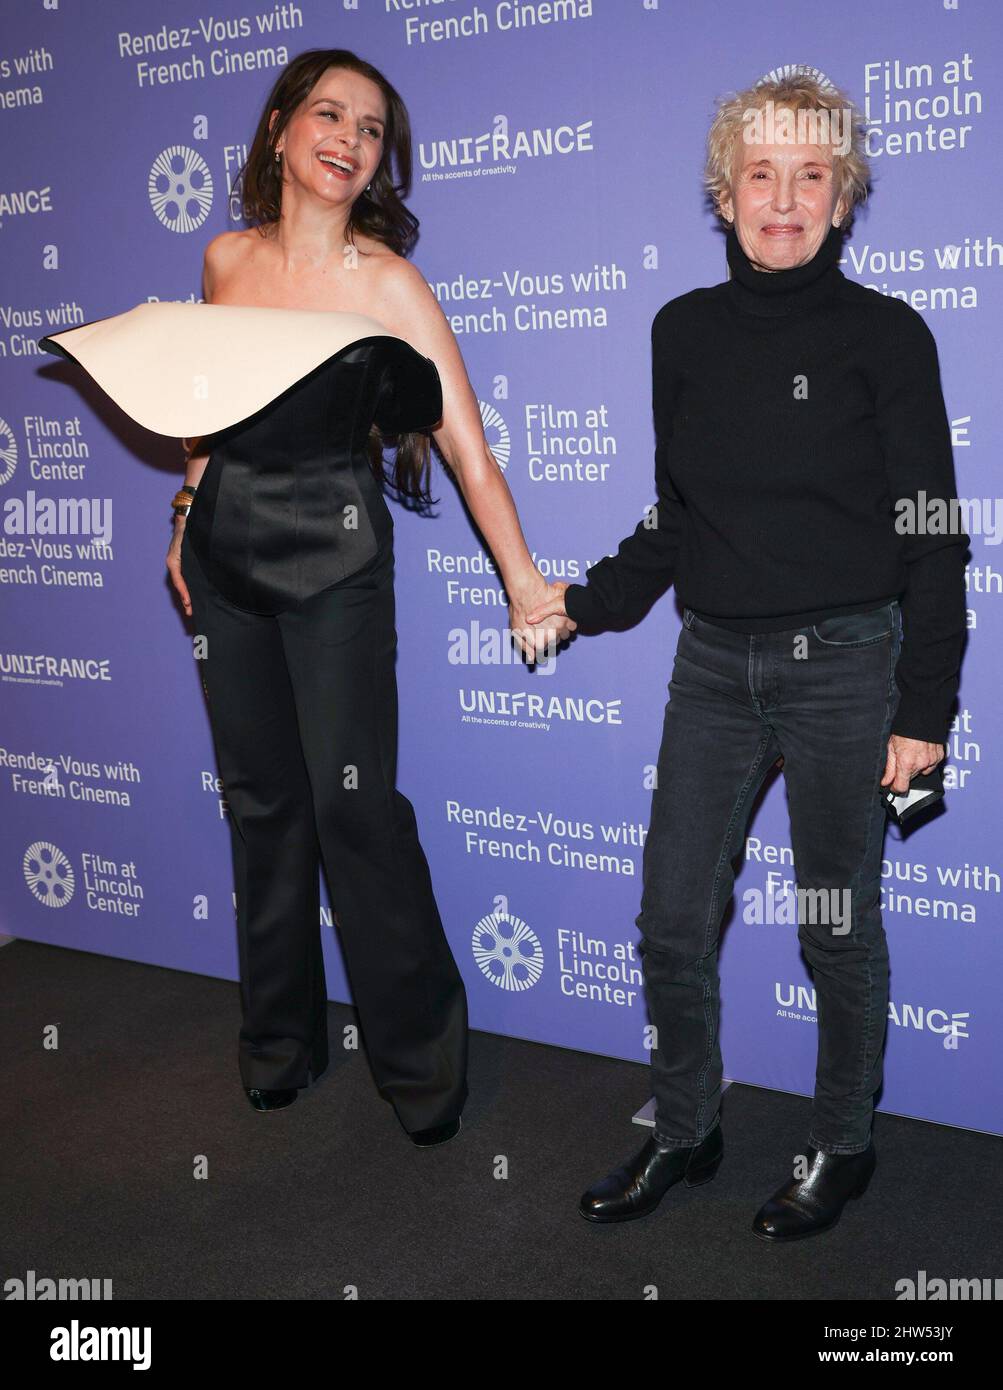 New York, NY, USA. 3rd Mar, 2022. Juliette Binoche, Claire Denis at arrivals for Rendez-Vous With French Cinema's Opening Night with Claire Denis's FIRE, Film at Lincoln Center - Walter Reade Theater, New York, NY March 3, 2022. Credit: CJ Rivera/Everett Collection/Alamy Live News Stock Photo